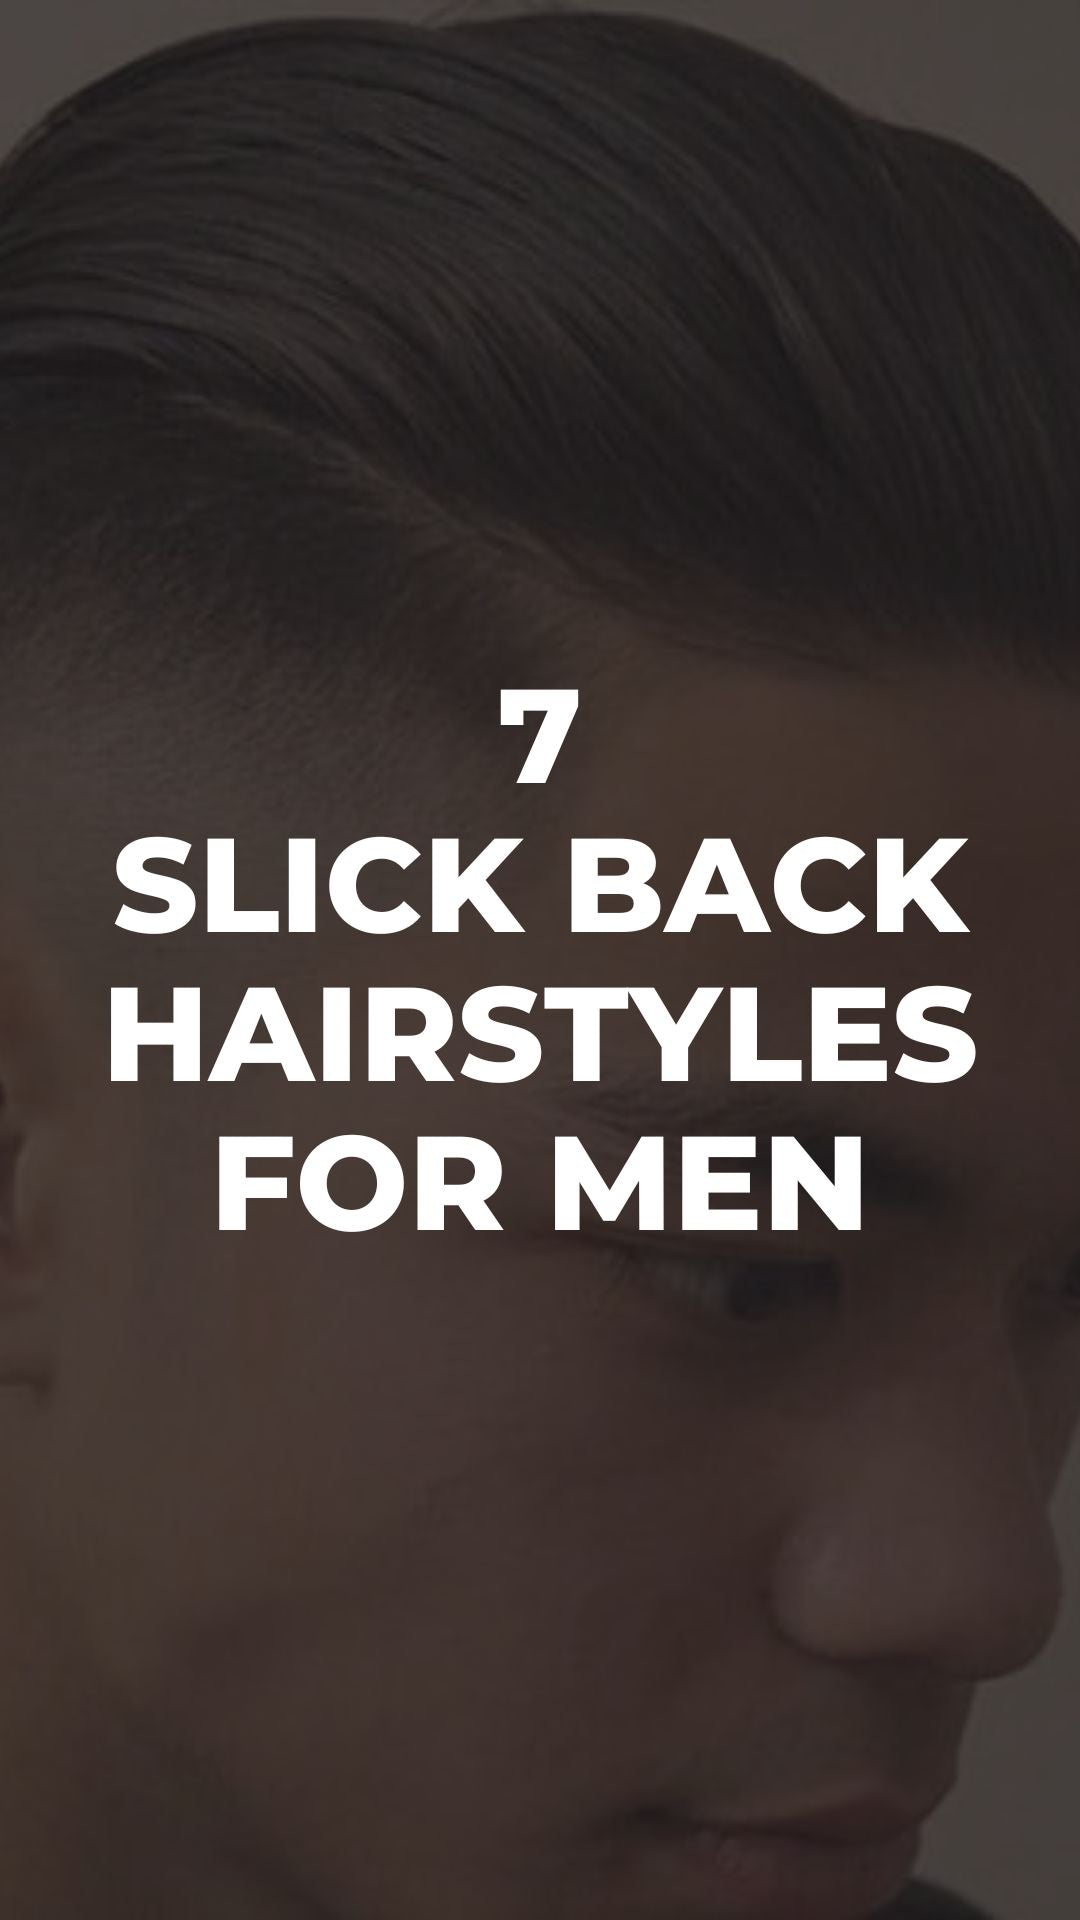 Best Hairstyles for Men - Quiff, Pompadour or High Fade (Infographic) -  North Shore Wigs & Hair Replacement - Boston MA